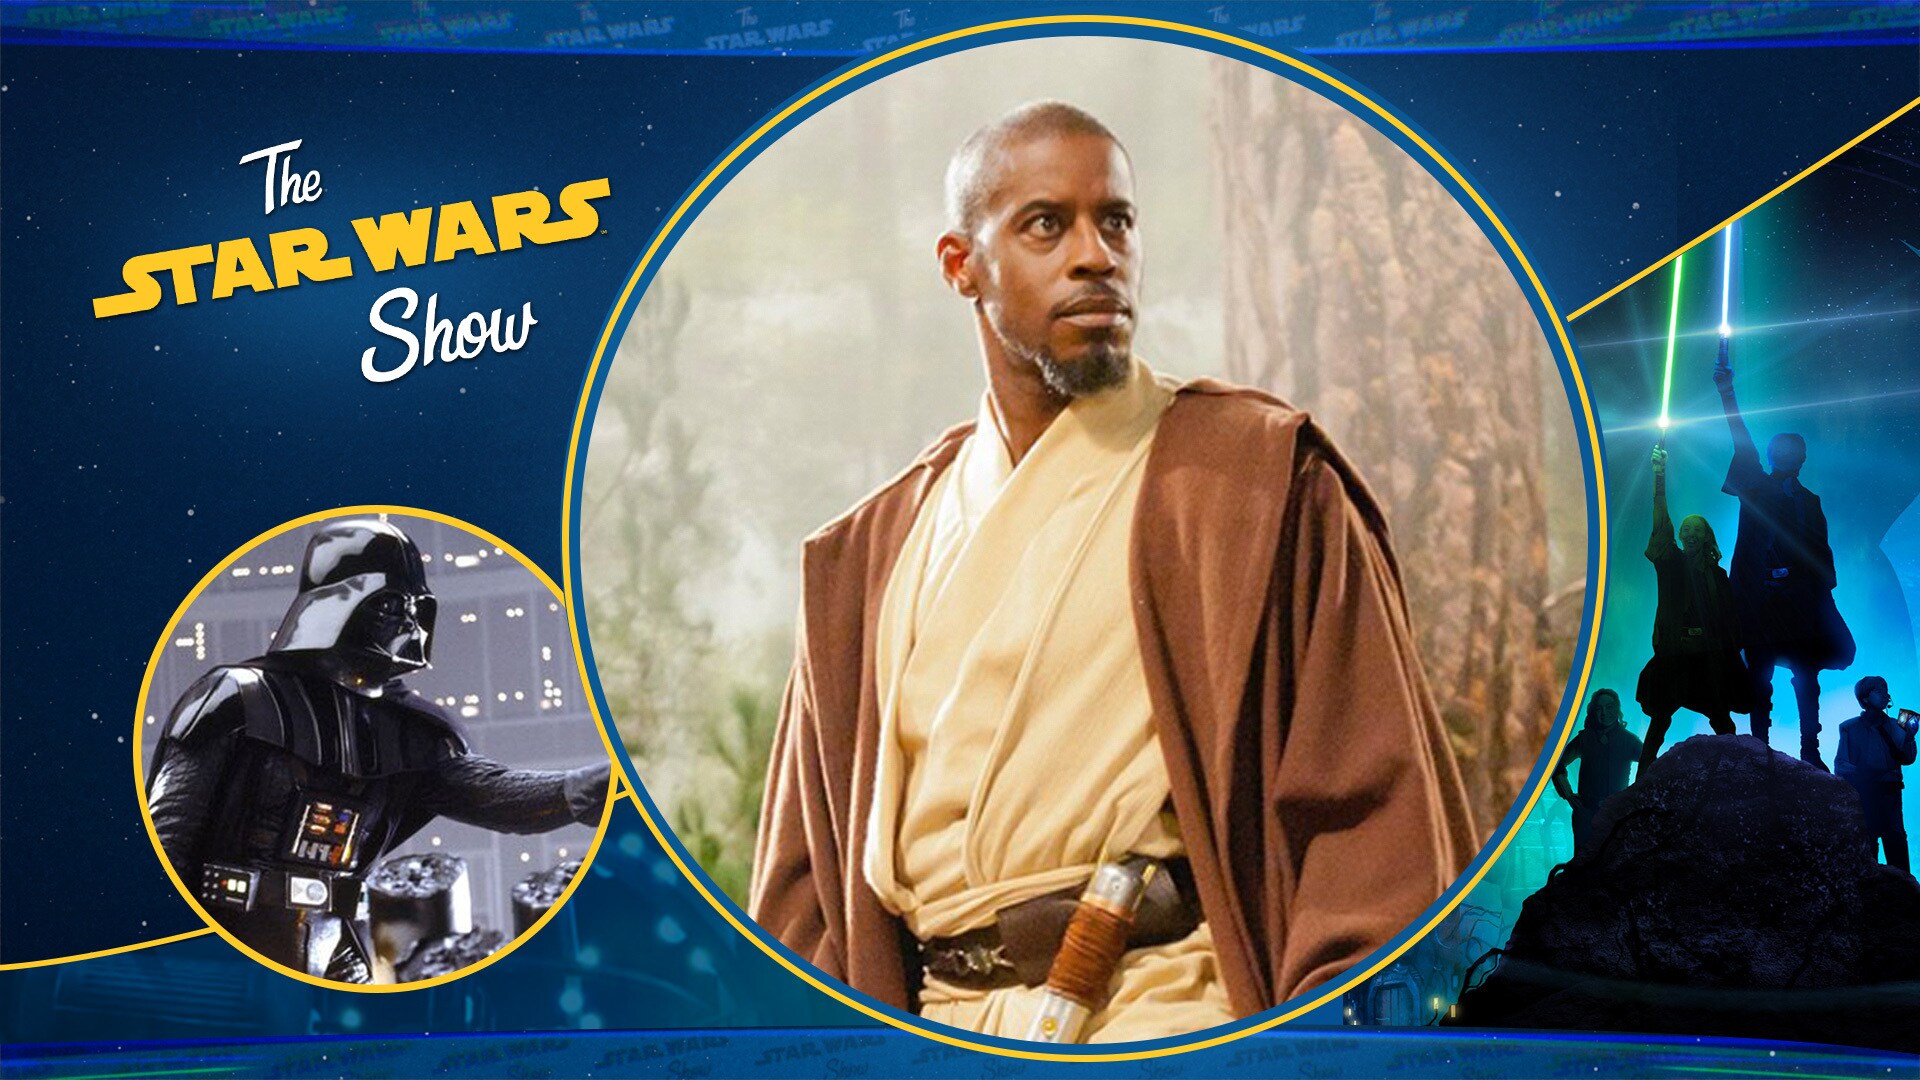 Ahmed Best and Mary Holland Talk Jedi Temple Challenge, And We Celebrate The Empire Strikes Back!